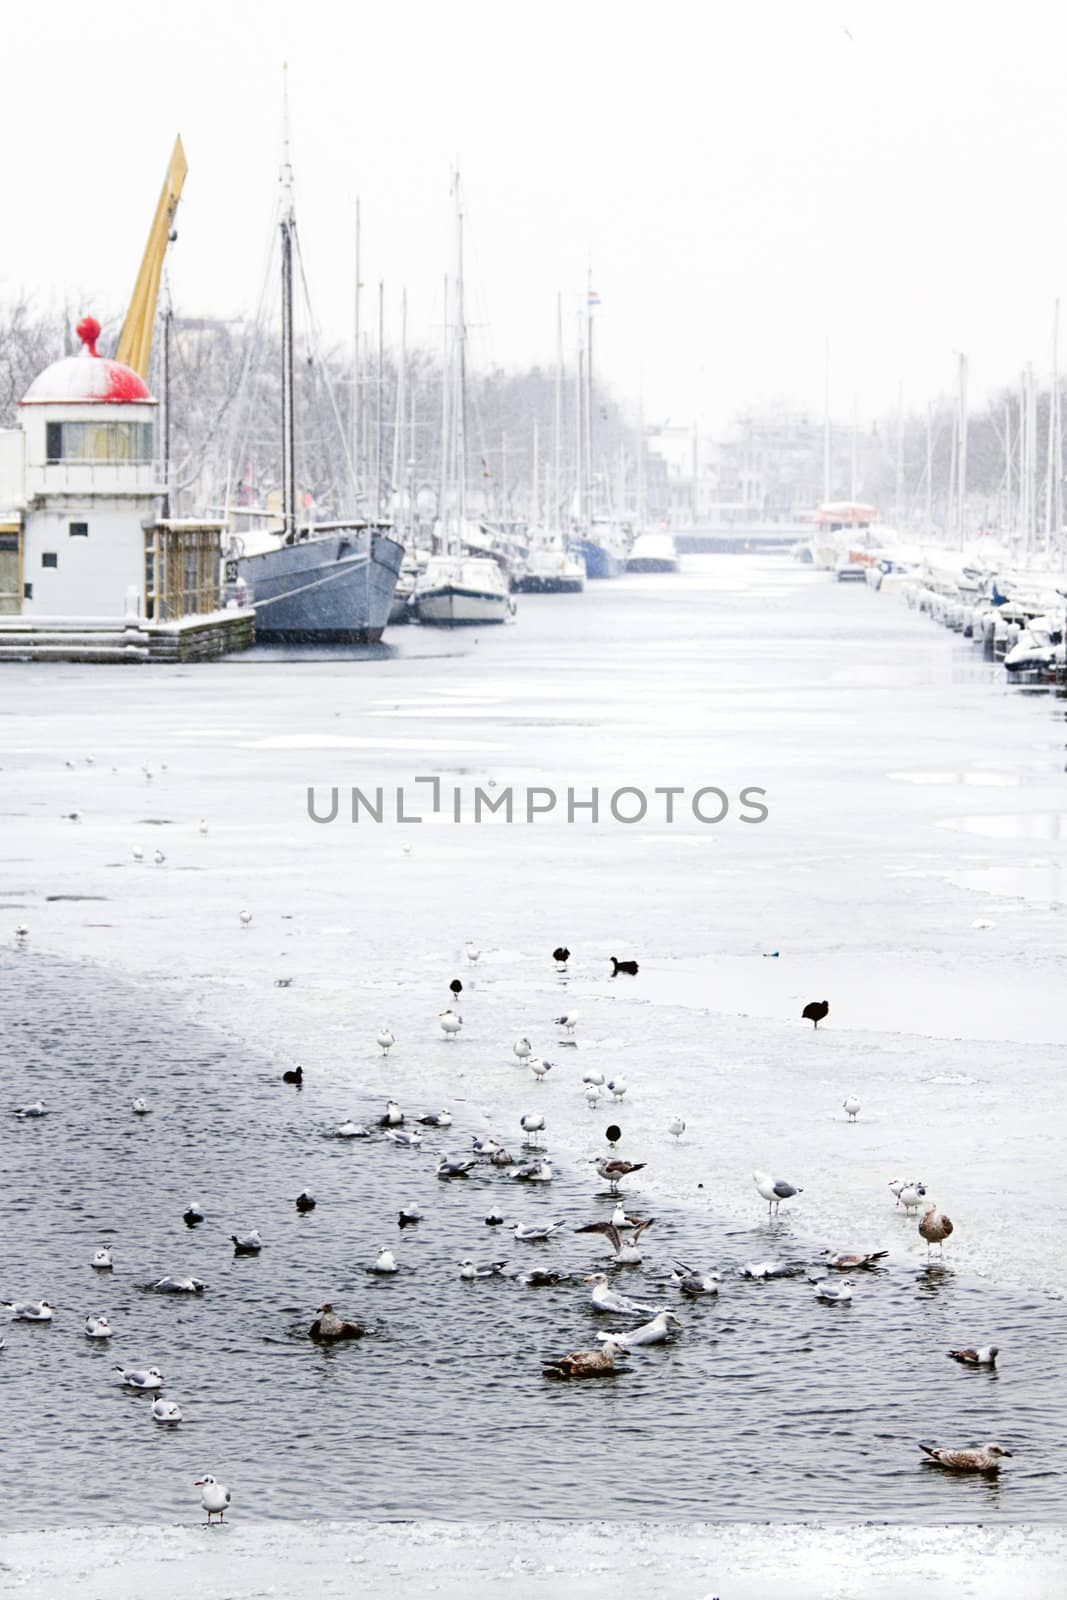 Snow in the city - harbor in winter by Colette